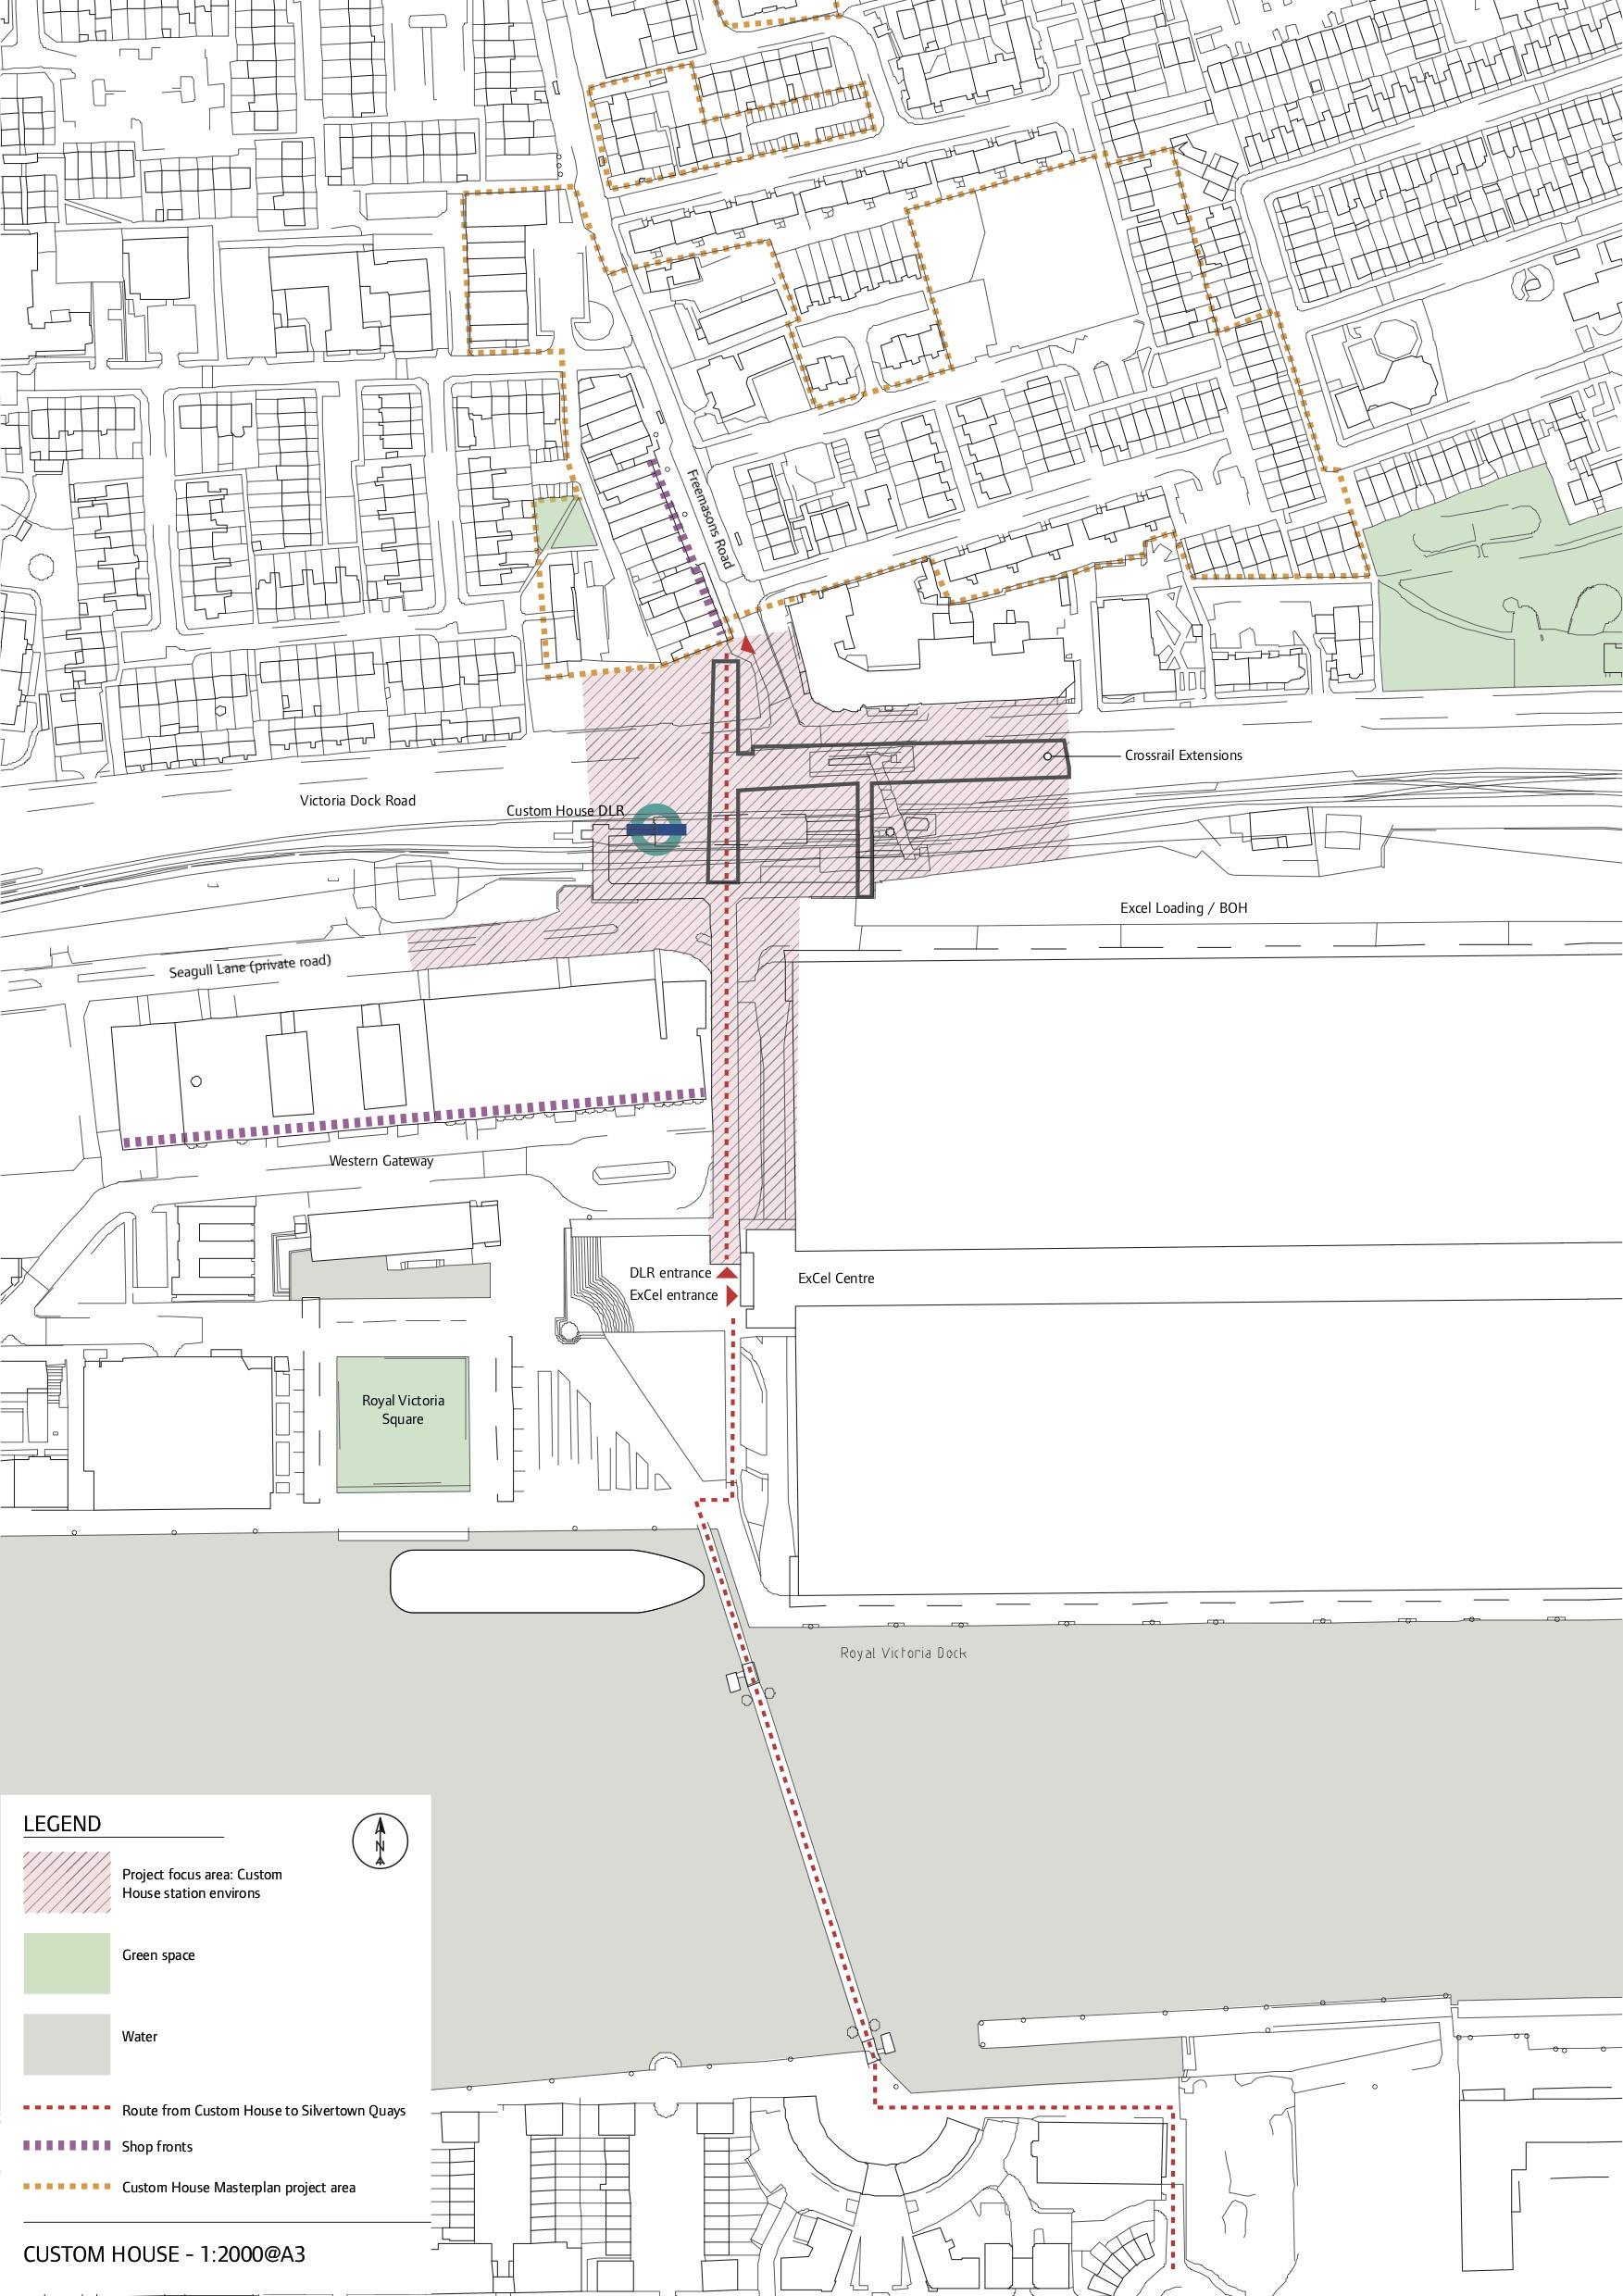 Map showing the area around Custom House station, with areas shaded just to the north and south as highlighting